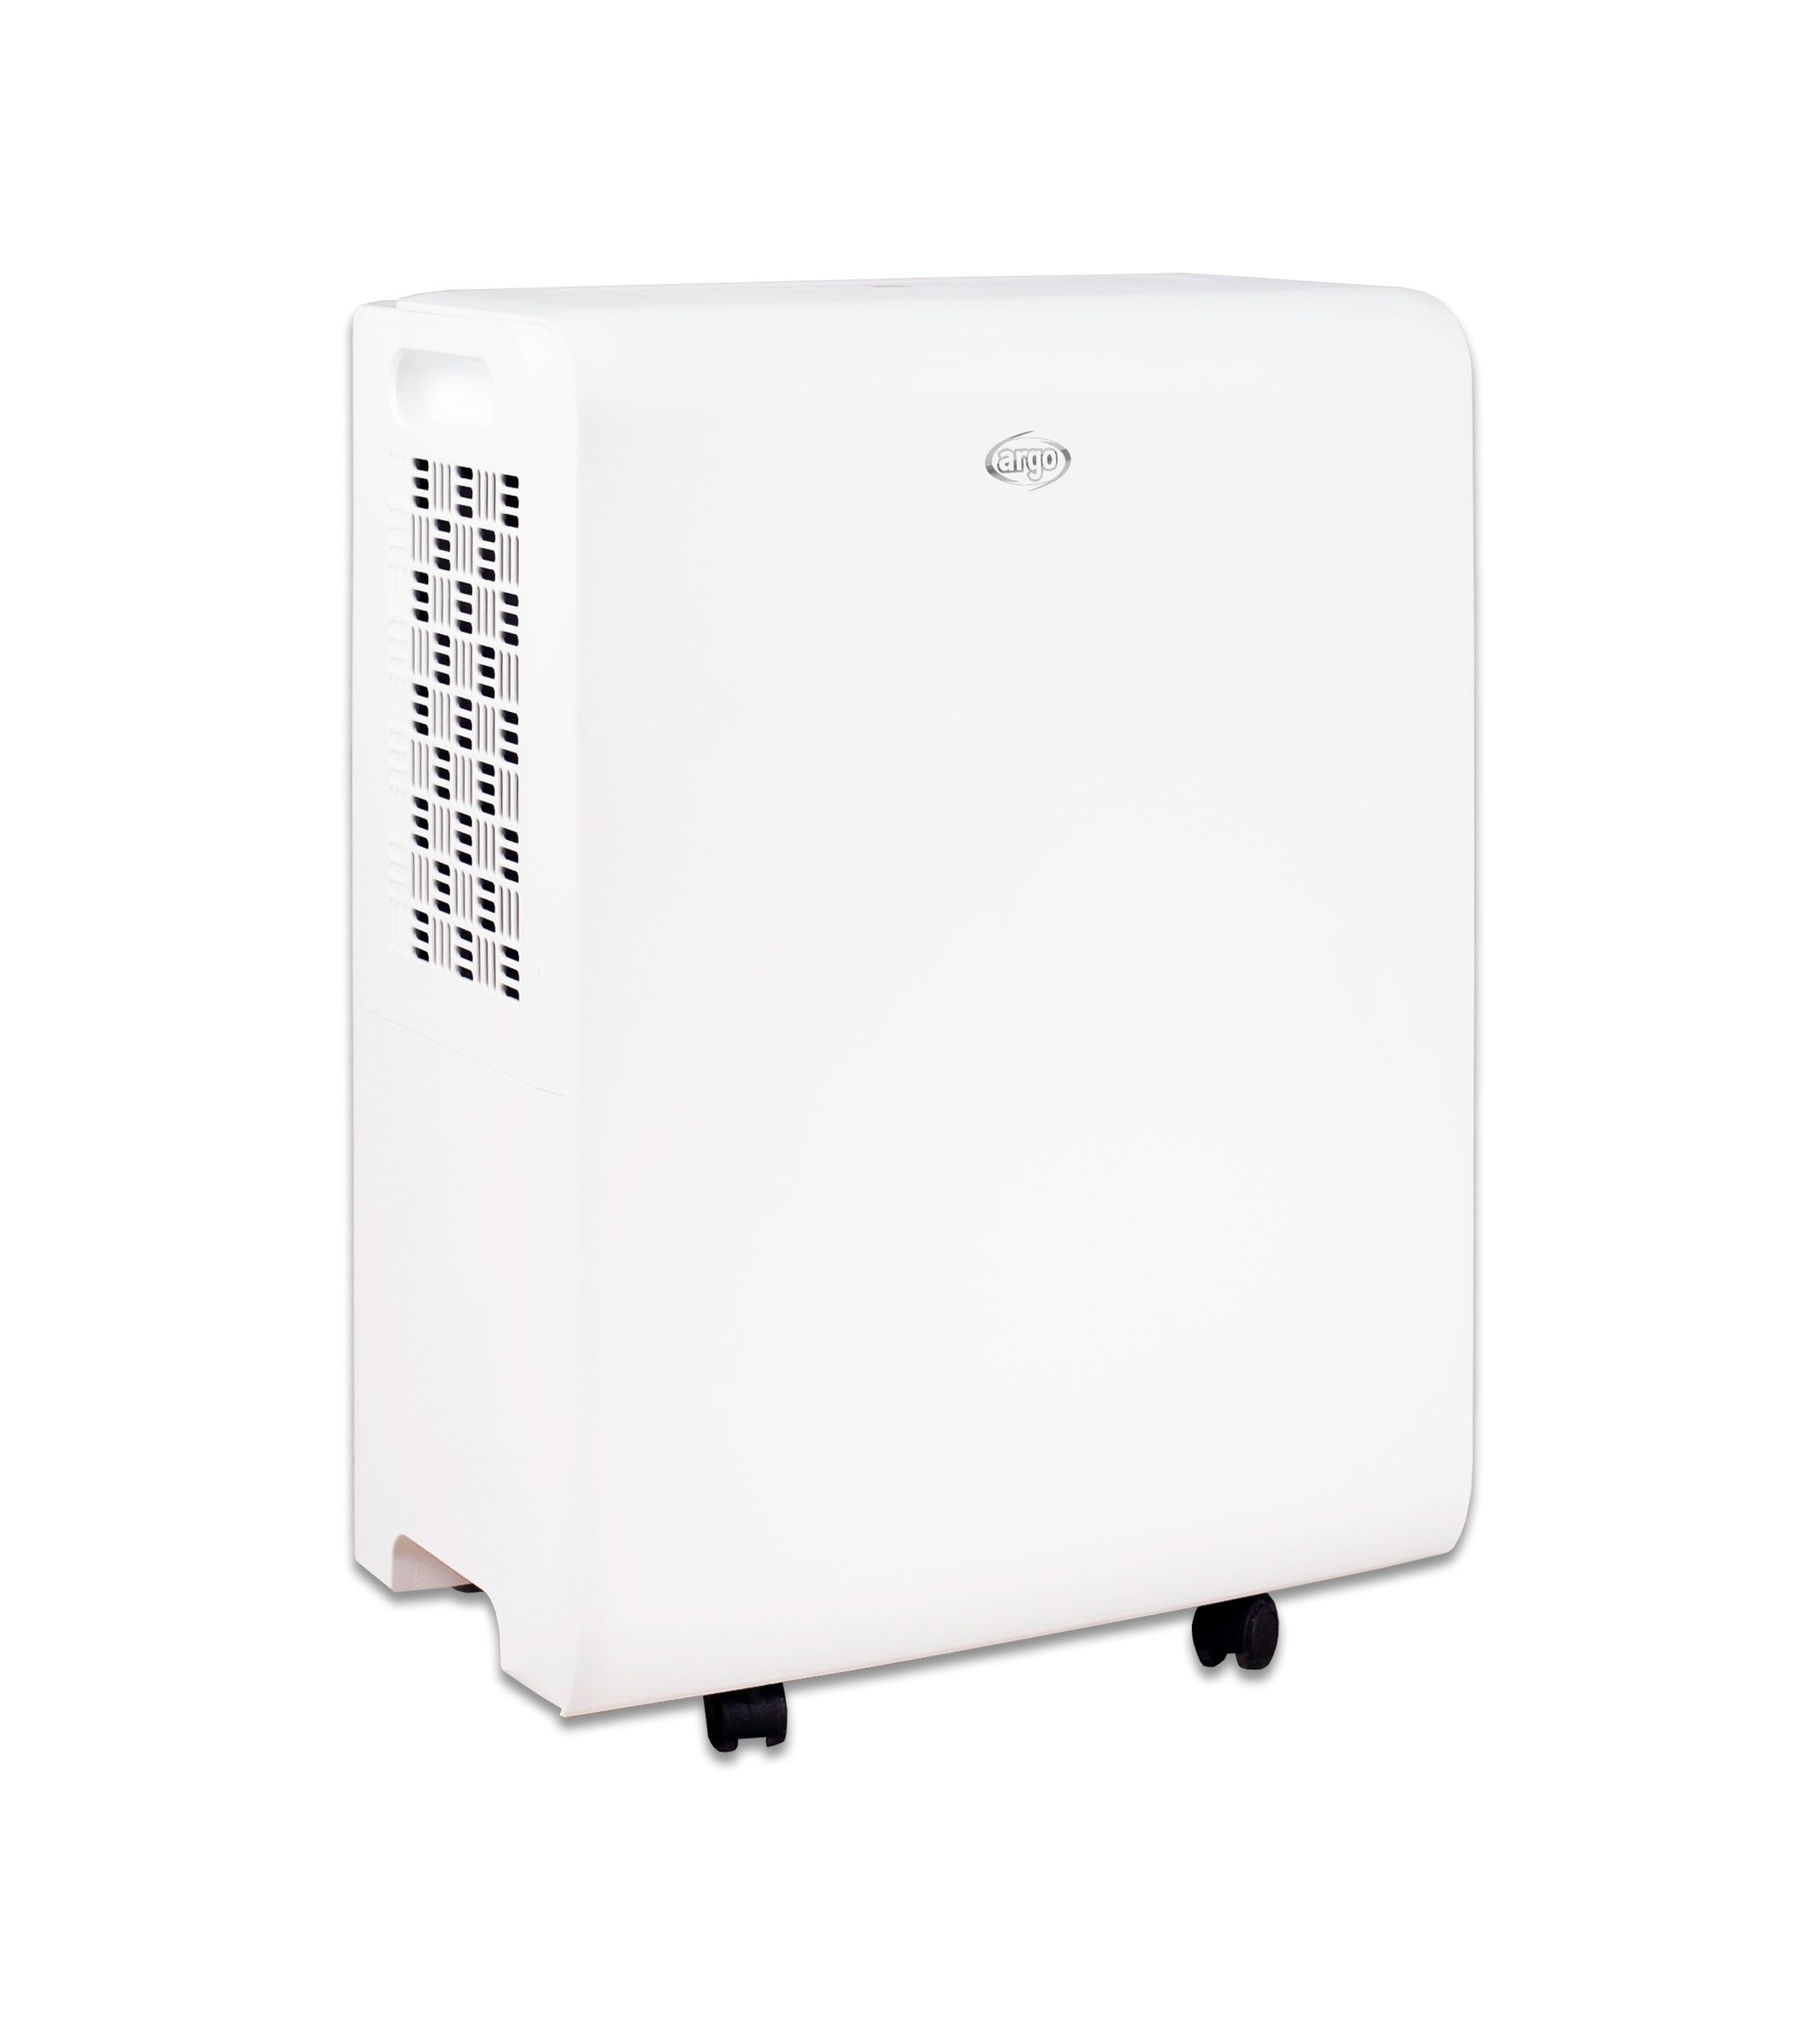 Deumidificatore - ARGOCLIMA Serie DRY PURY - 350W - Gas R290 - 21 L/24h -  Bianco